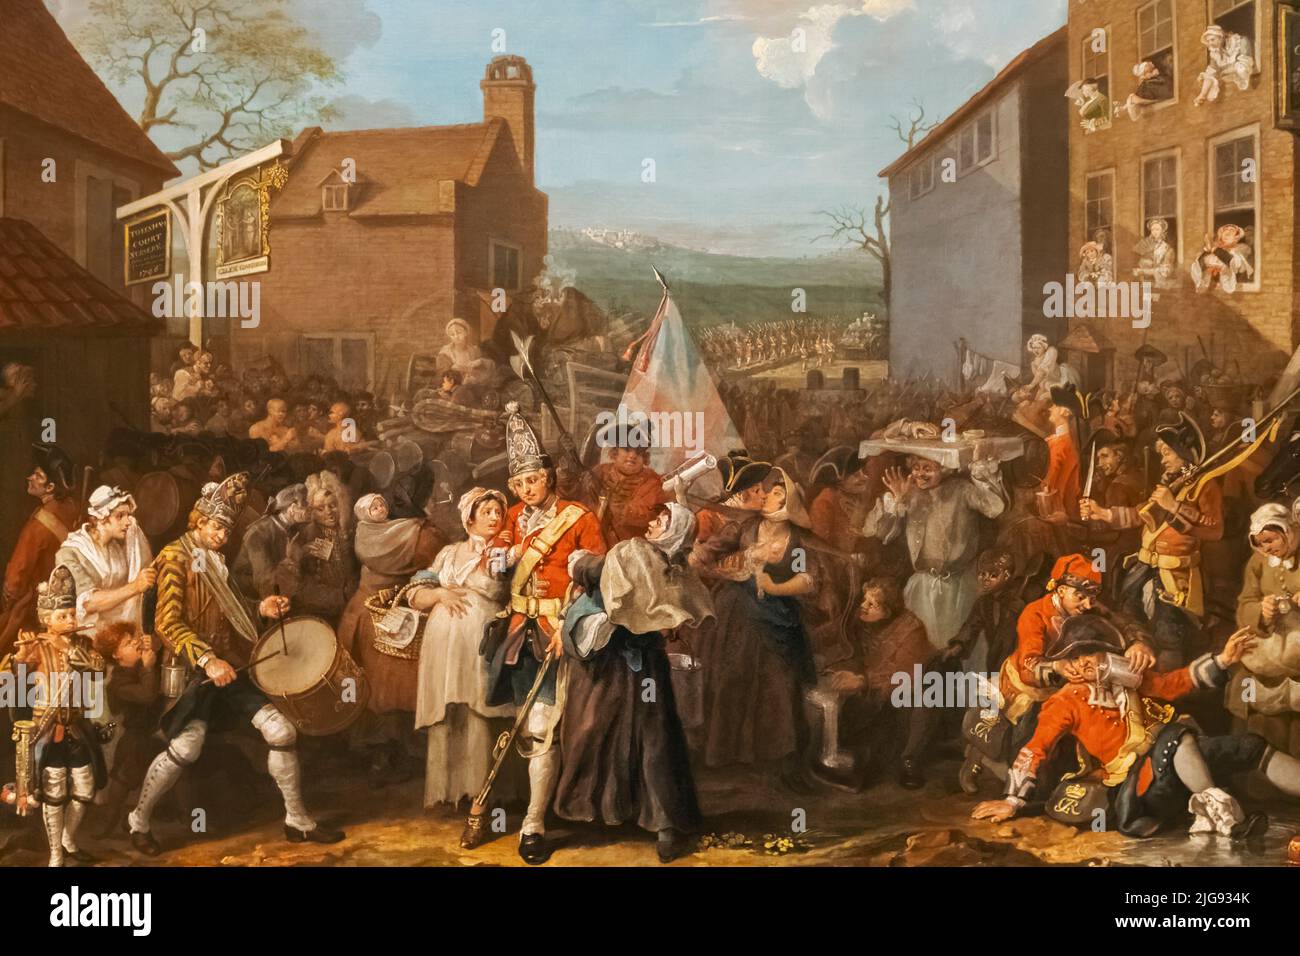 Painting titled 'The March of the Guards to Finchley' by William Hogarth dated 1750 Stock Photo